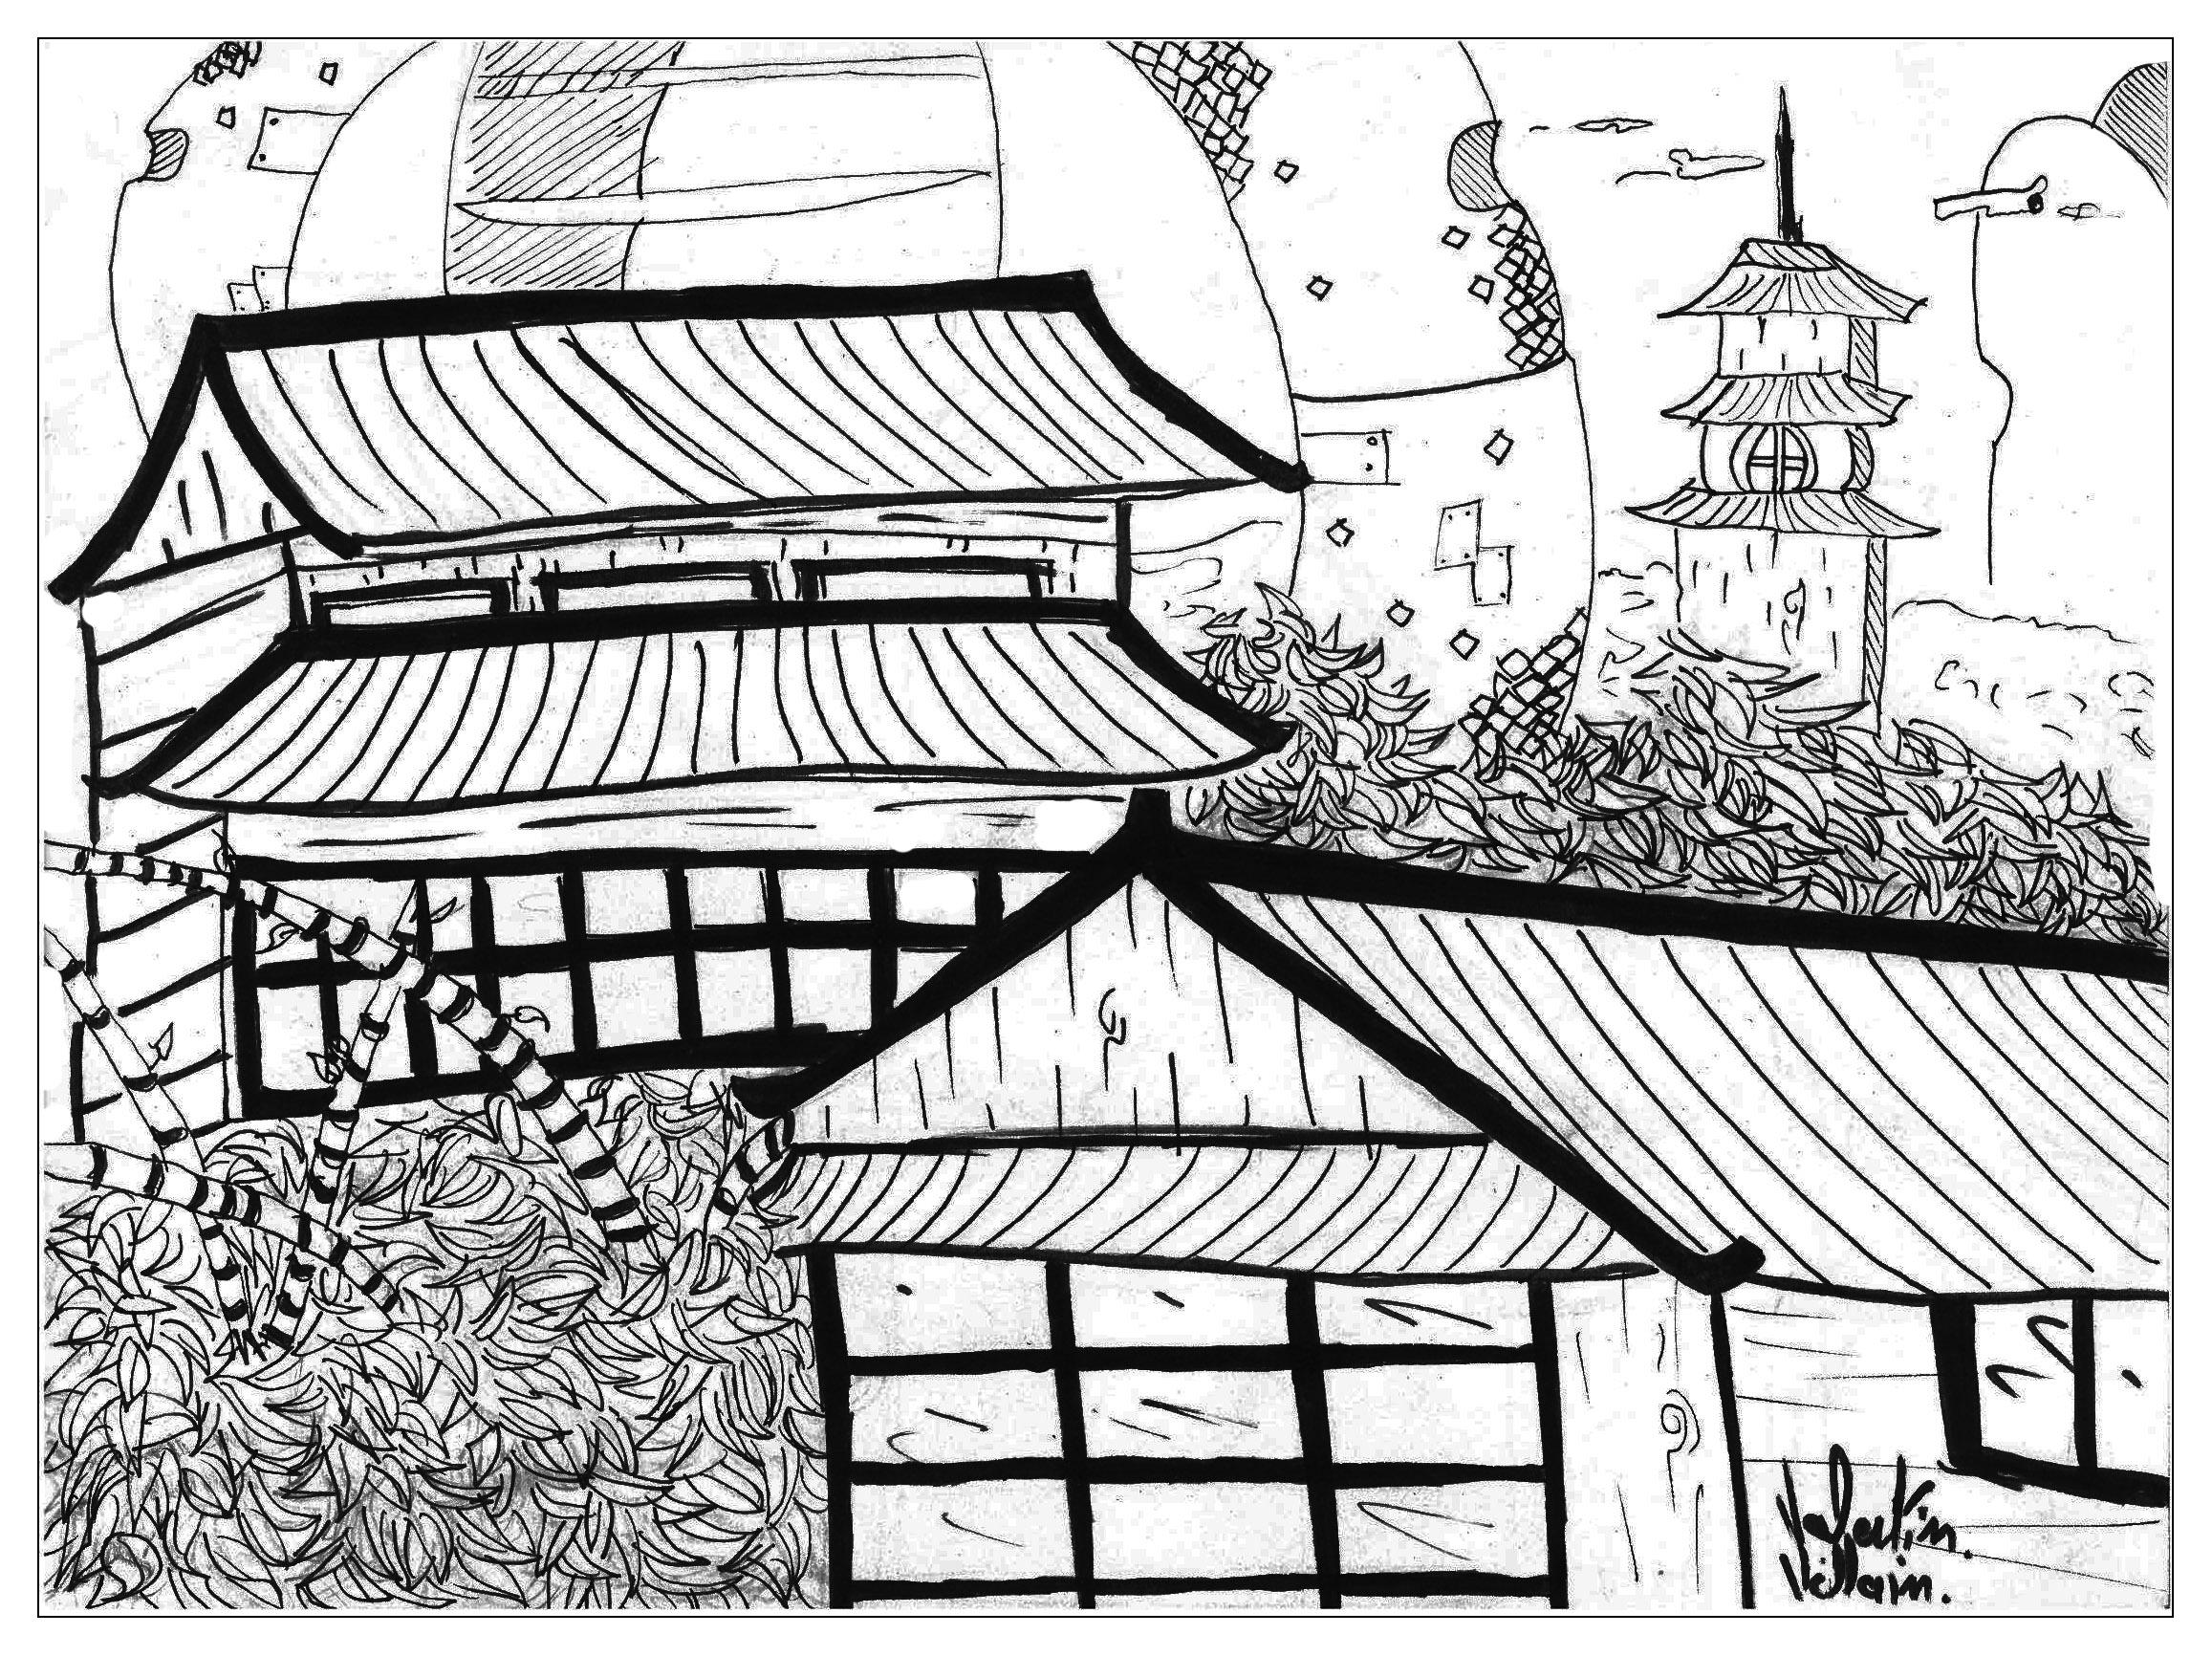 A great coloring page on the Japan theme by Valentin, Artist : Valentin